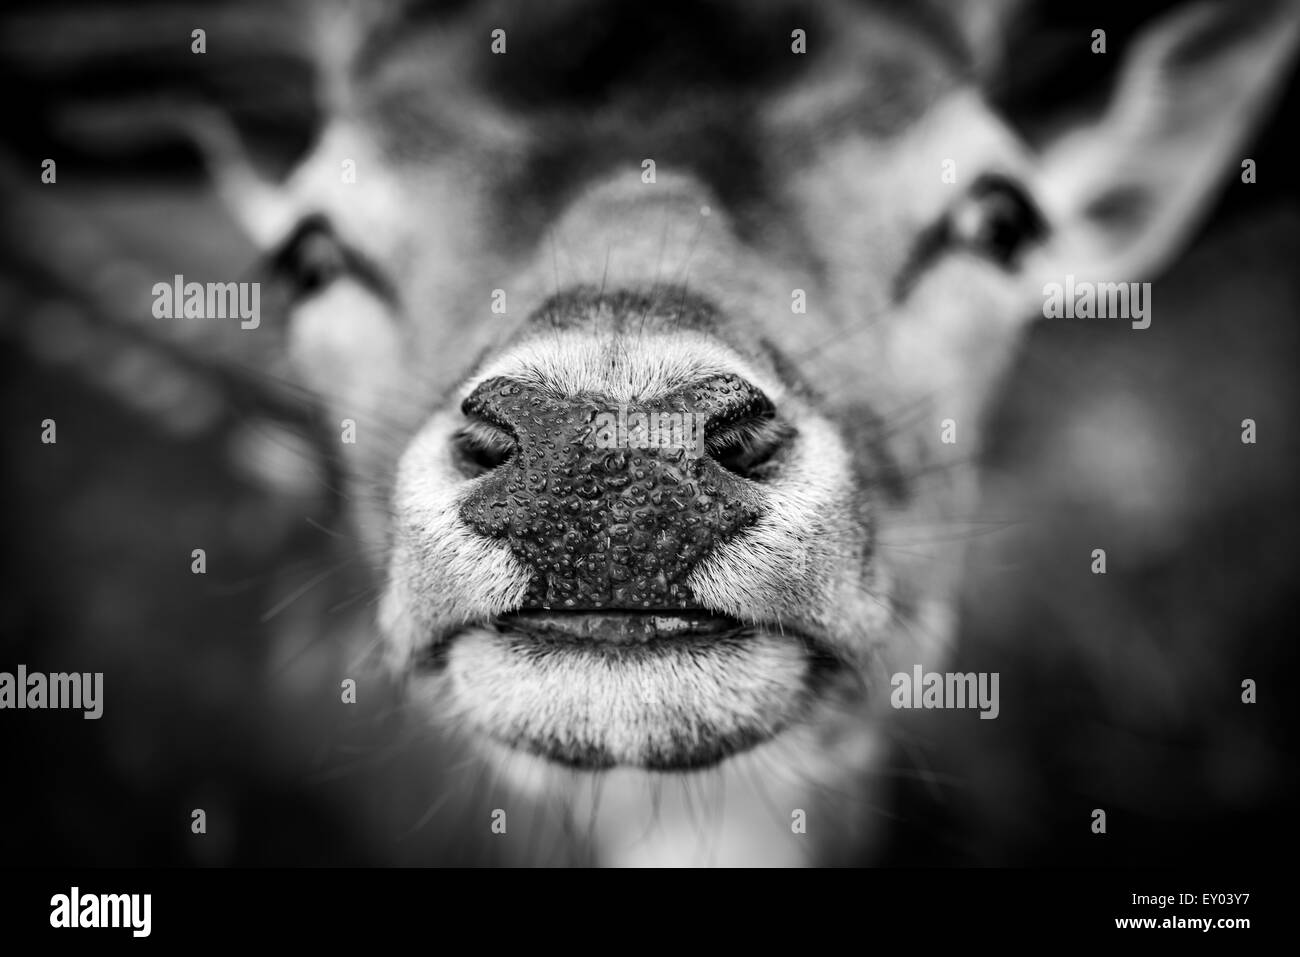 Deer nose Black and White Stock Photos & Images - Alamy